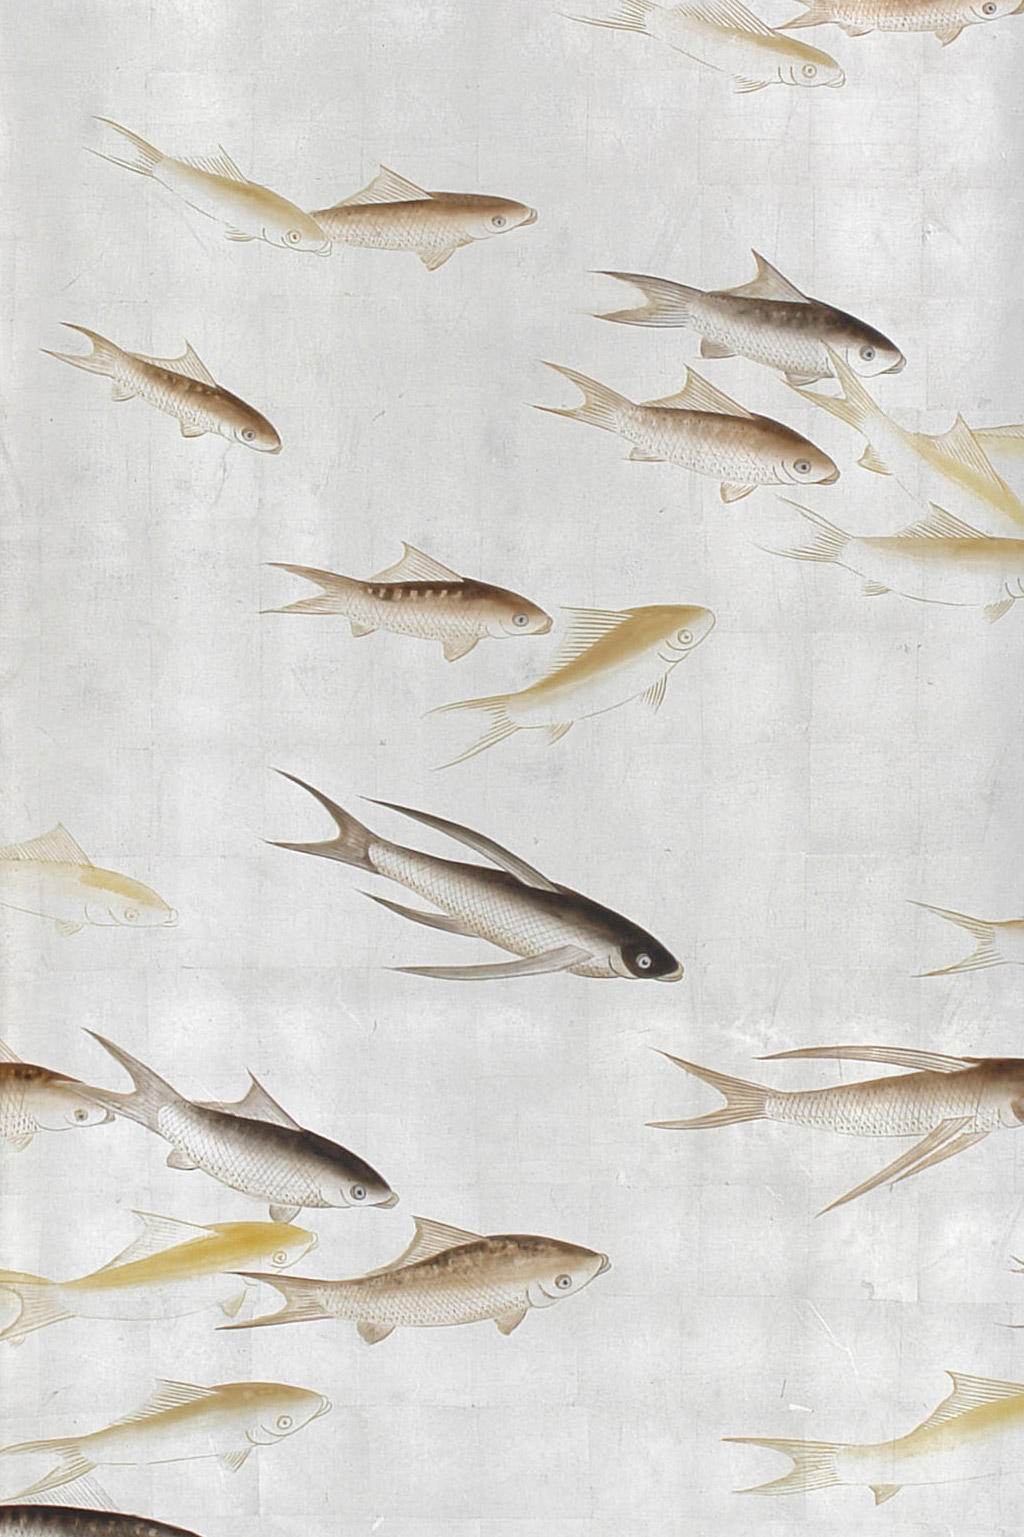 'Fishes' in Amber design colours on Real Silver gilded silk